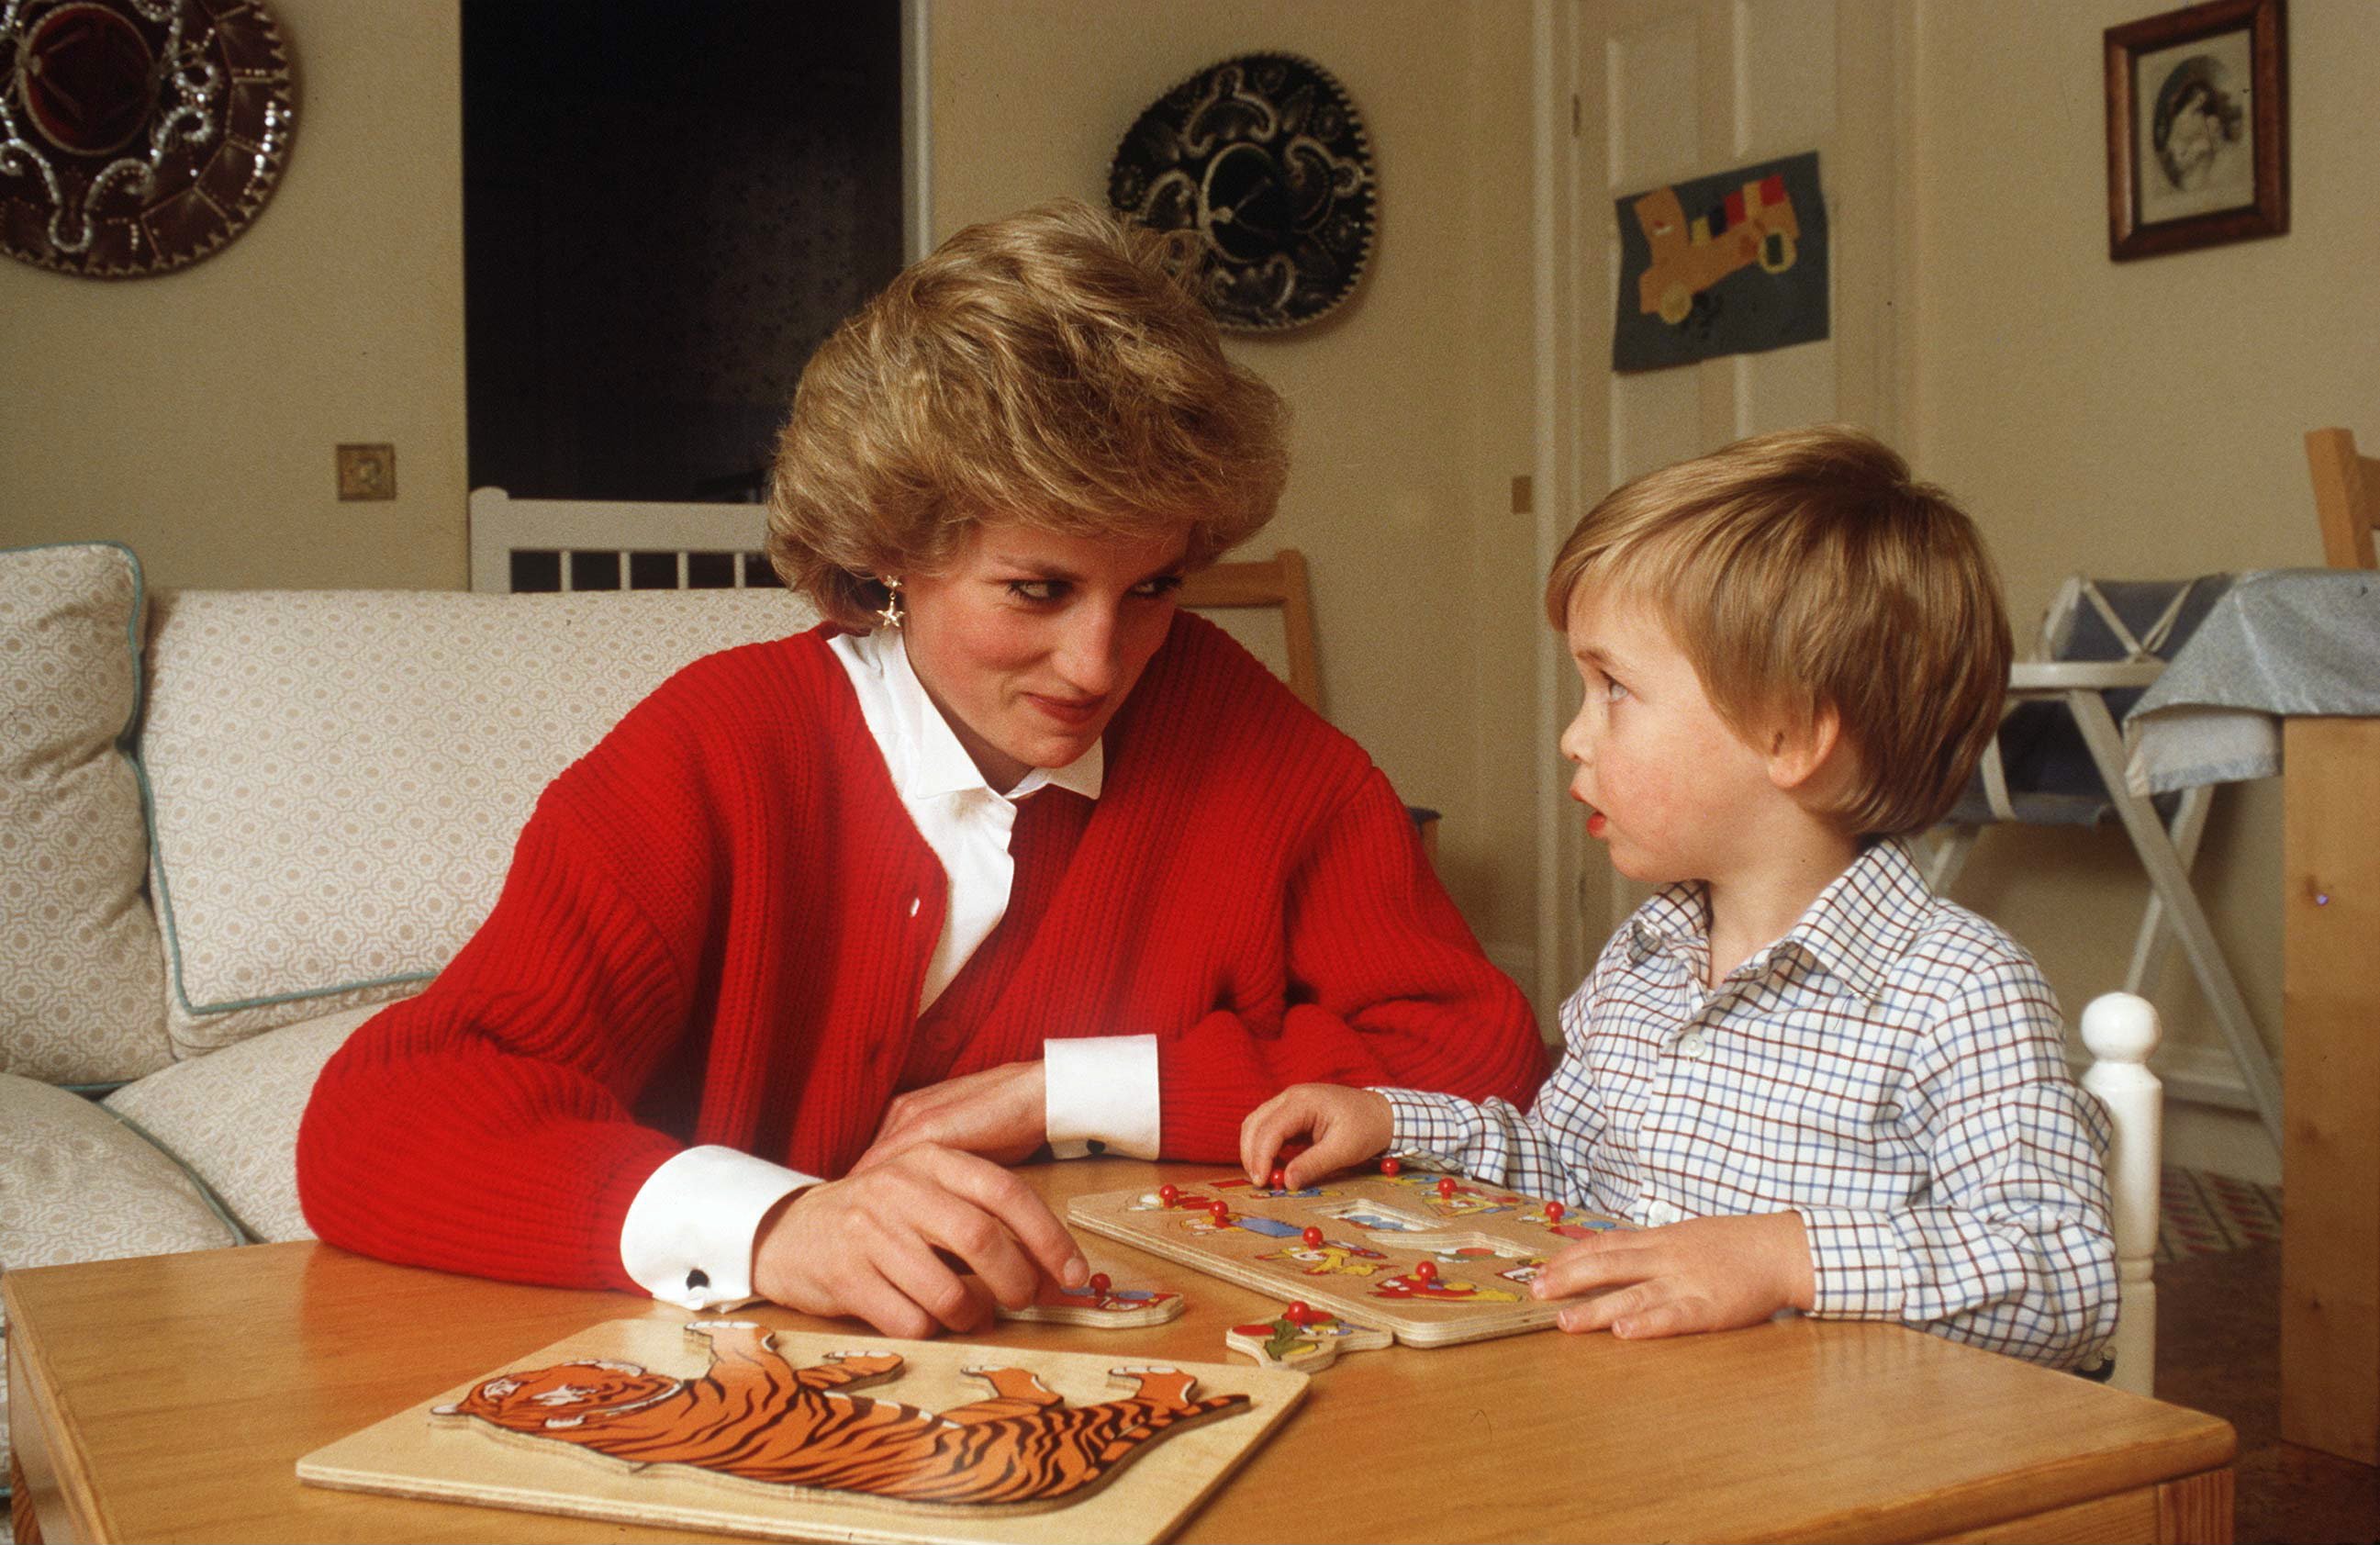  Princess Diana Helping Prince William With A Jigsaw Puzzle Toy In His Playroom At Home In Kensington Palace. | Source: Getty Images